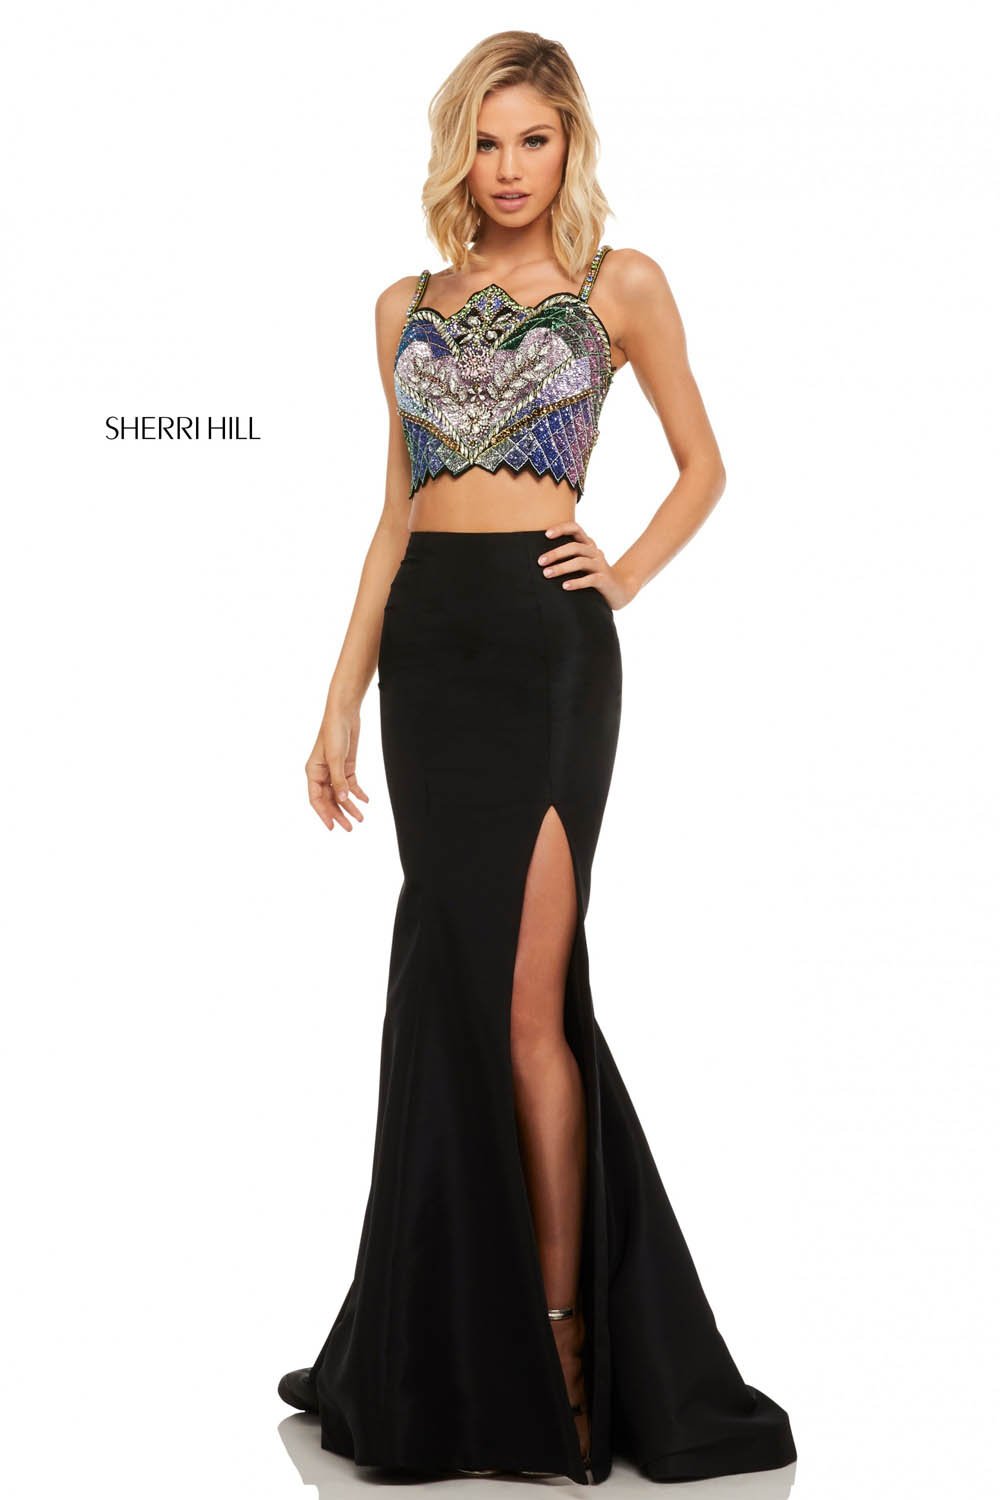 Sherri Hill 52466 dress images in these colors: Black Pink Mulighti.